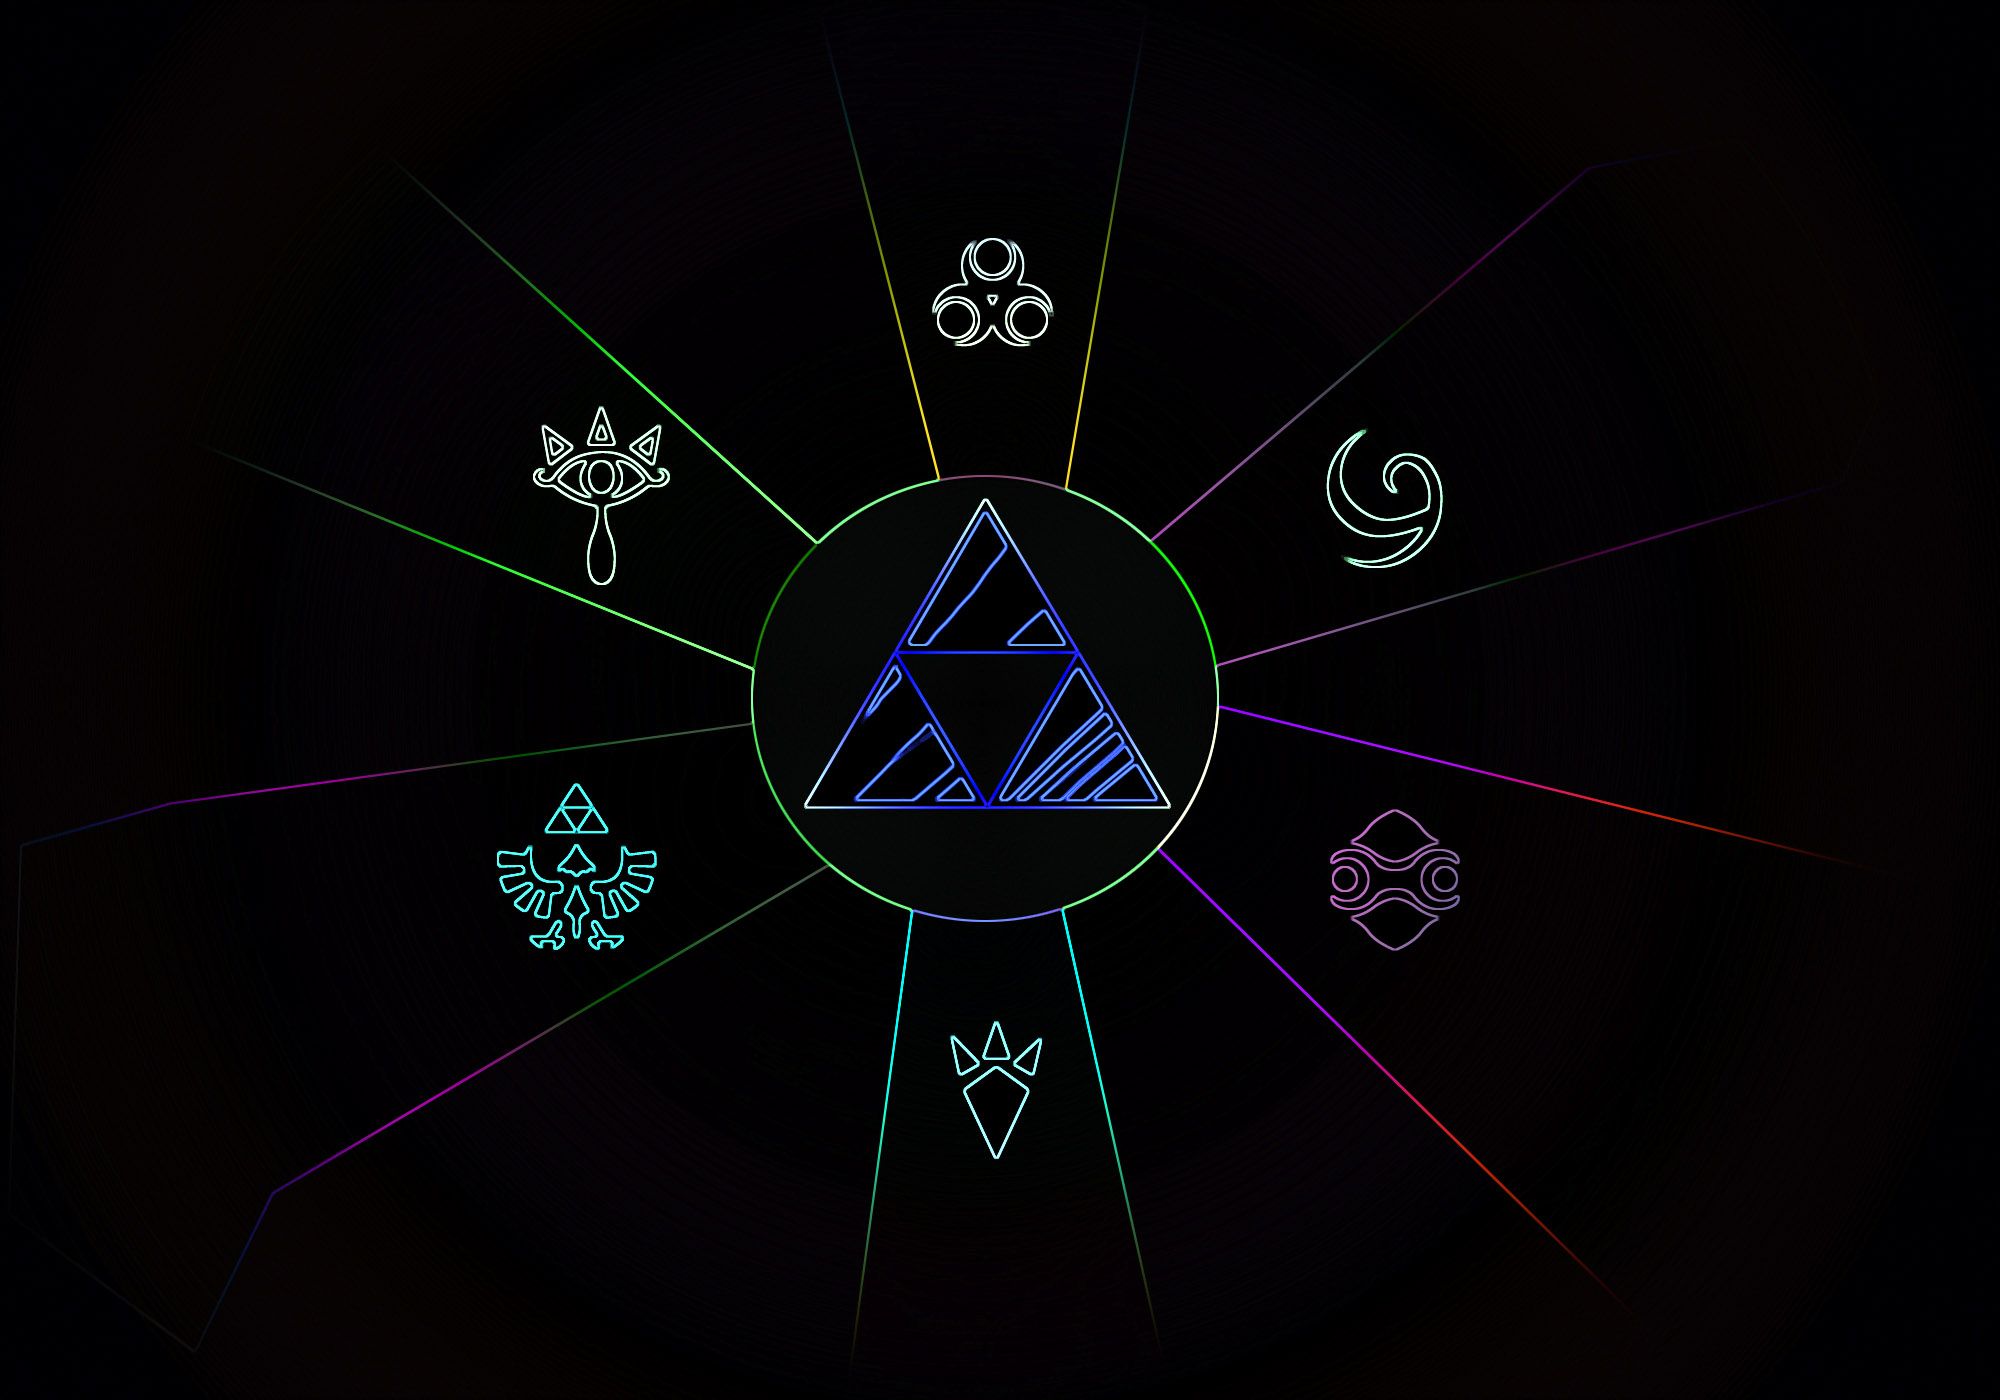 13 Triforce HD Wallpapers Backgrounds - Wallpaper Abyss